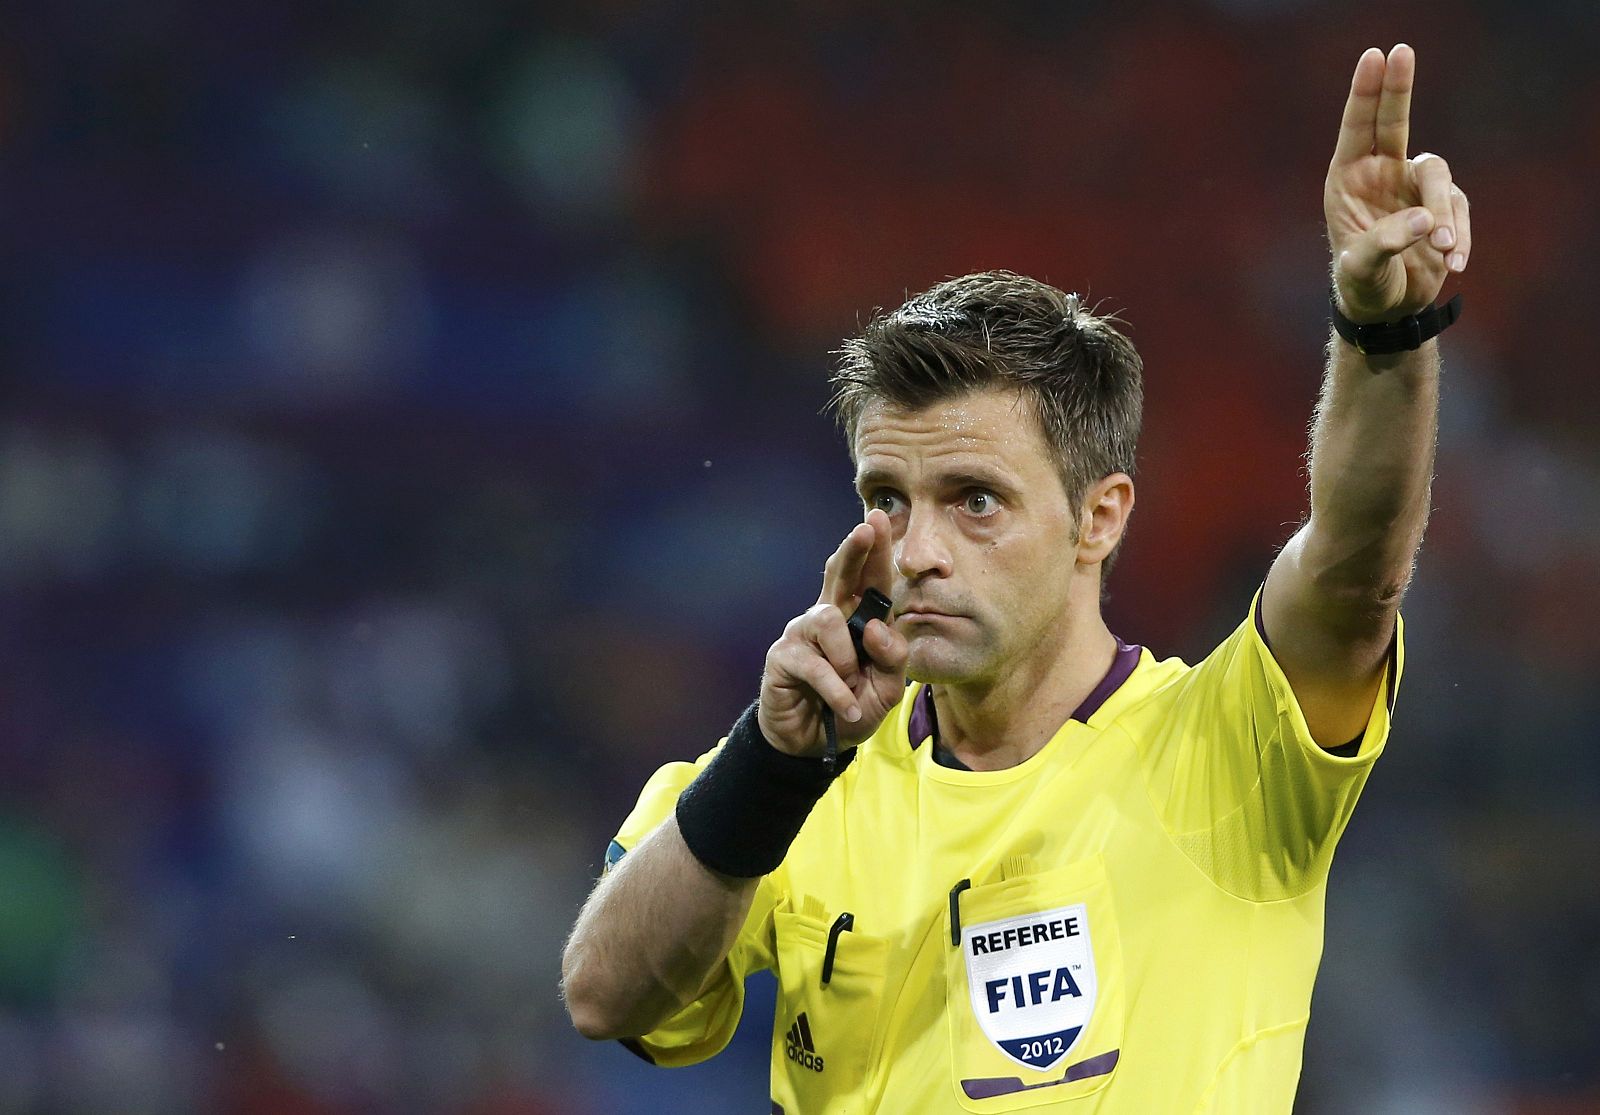 Referee Rizzoli of Italy reacts during their Group B Euro 2012 soccer match between Portugal and Netherlands at the Metalist stadium in Kharkiv